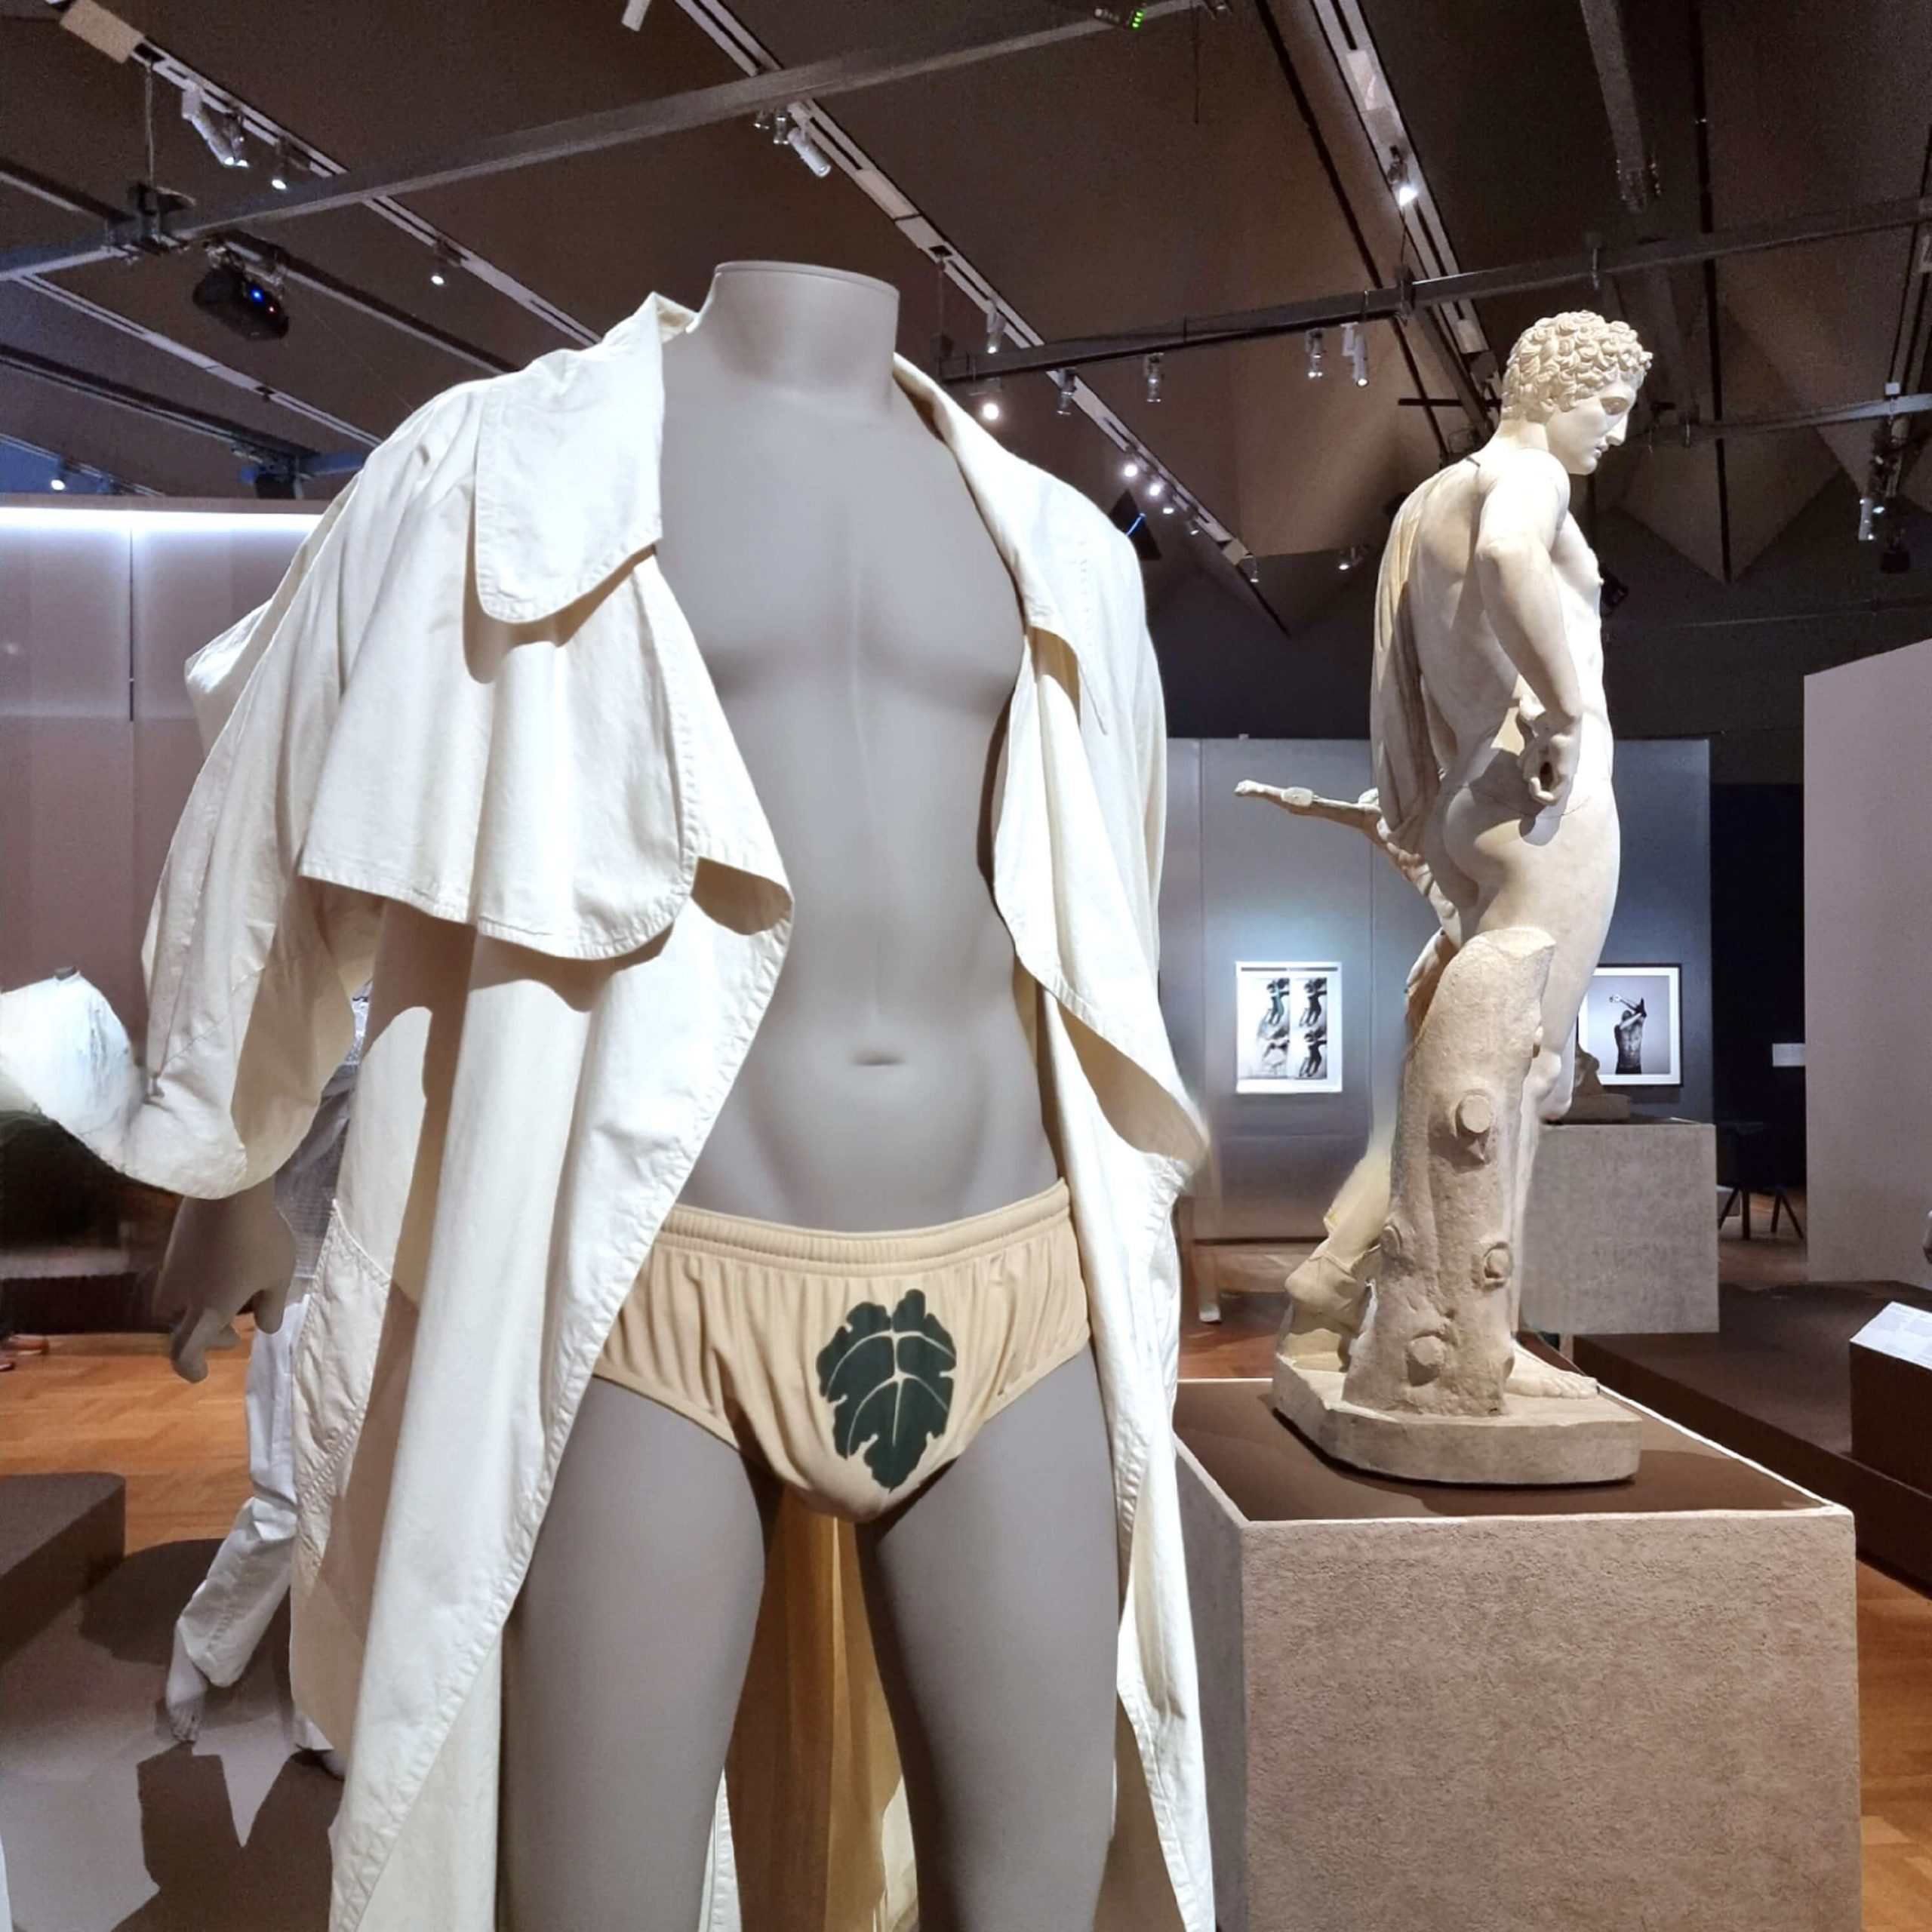 Fashioning Masculinities at the V&A Museum, London / Look by Vivienne Westwood / Exhibition View / 2022